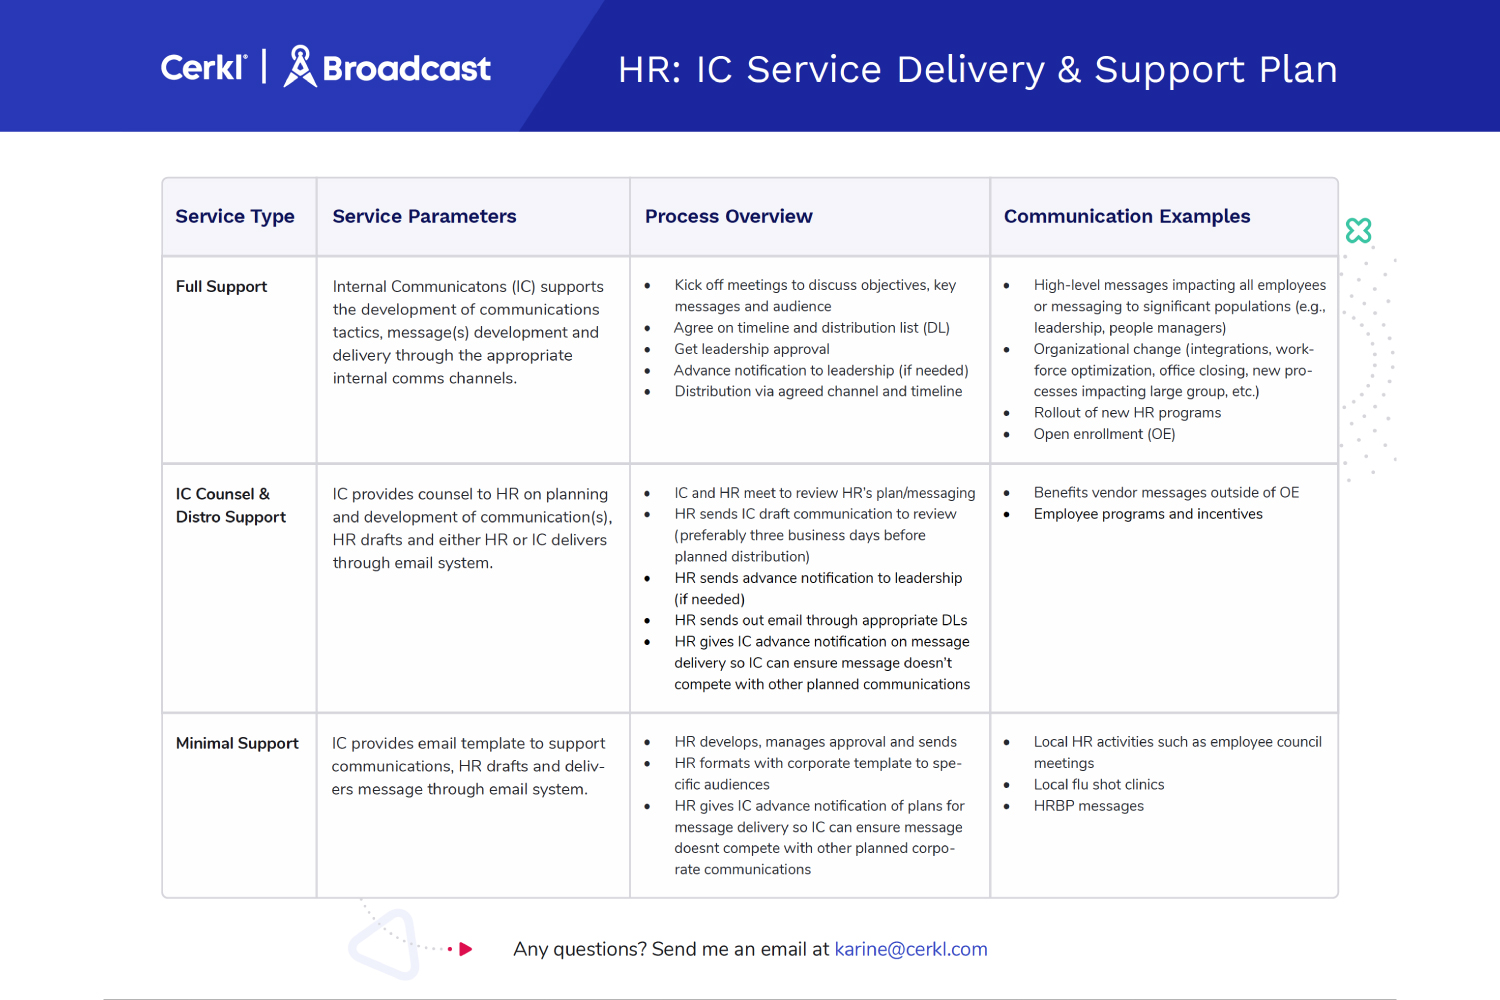 HR: IC Service Delivery & Support Template